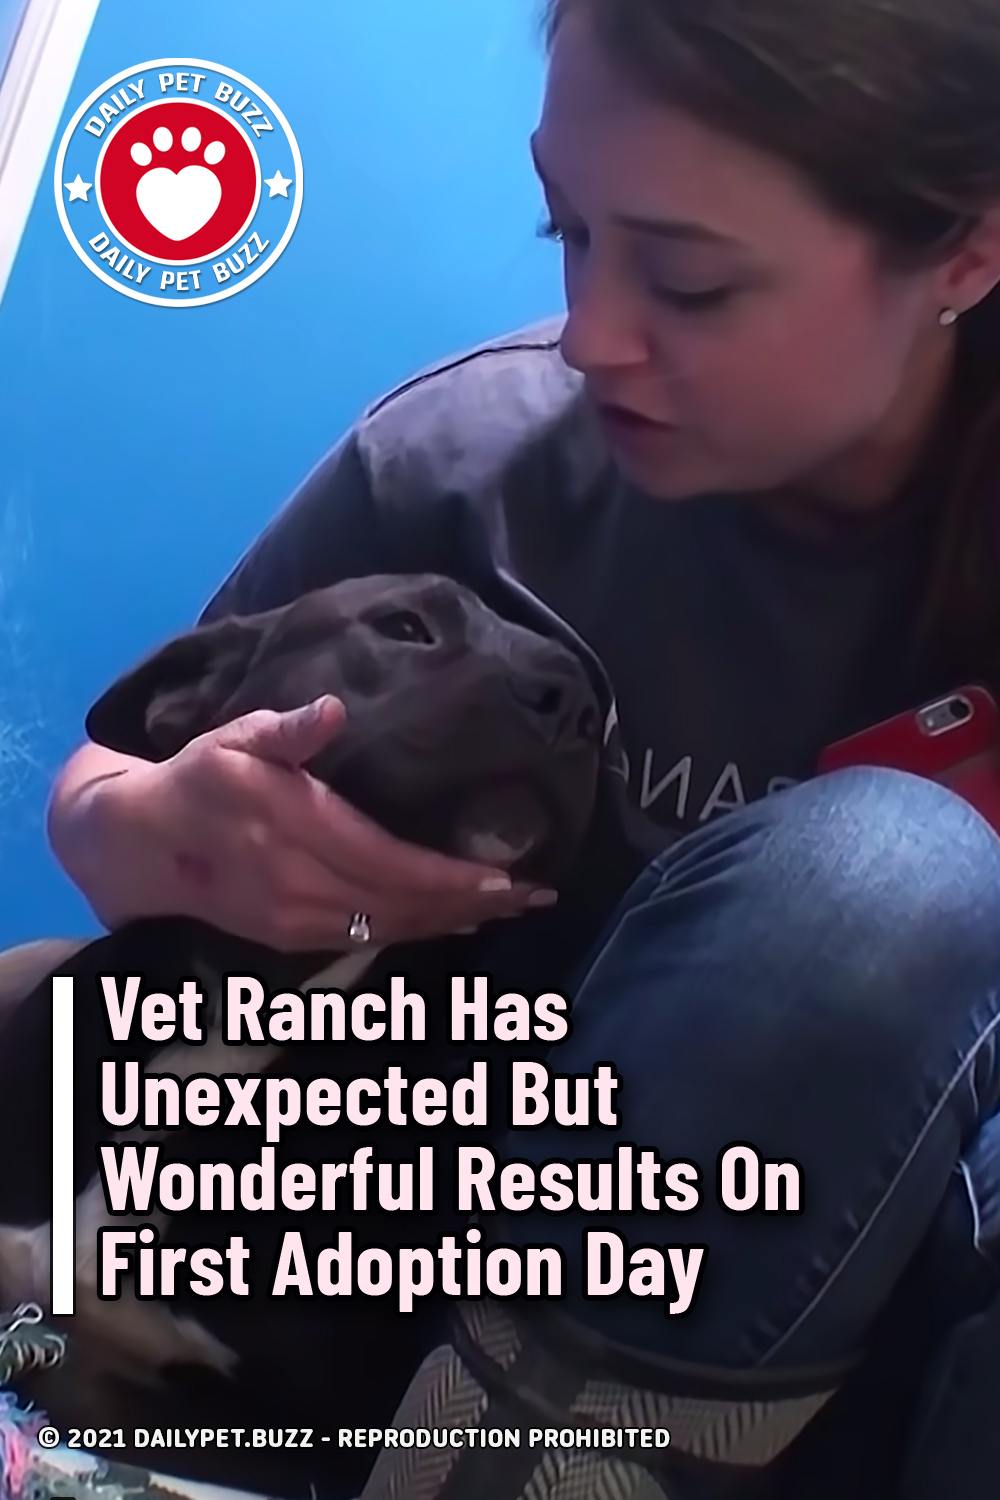 Vet Ranch Has Unexpected But Wonderful Results On First Adoption Day